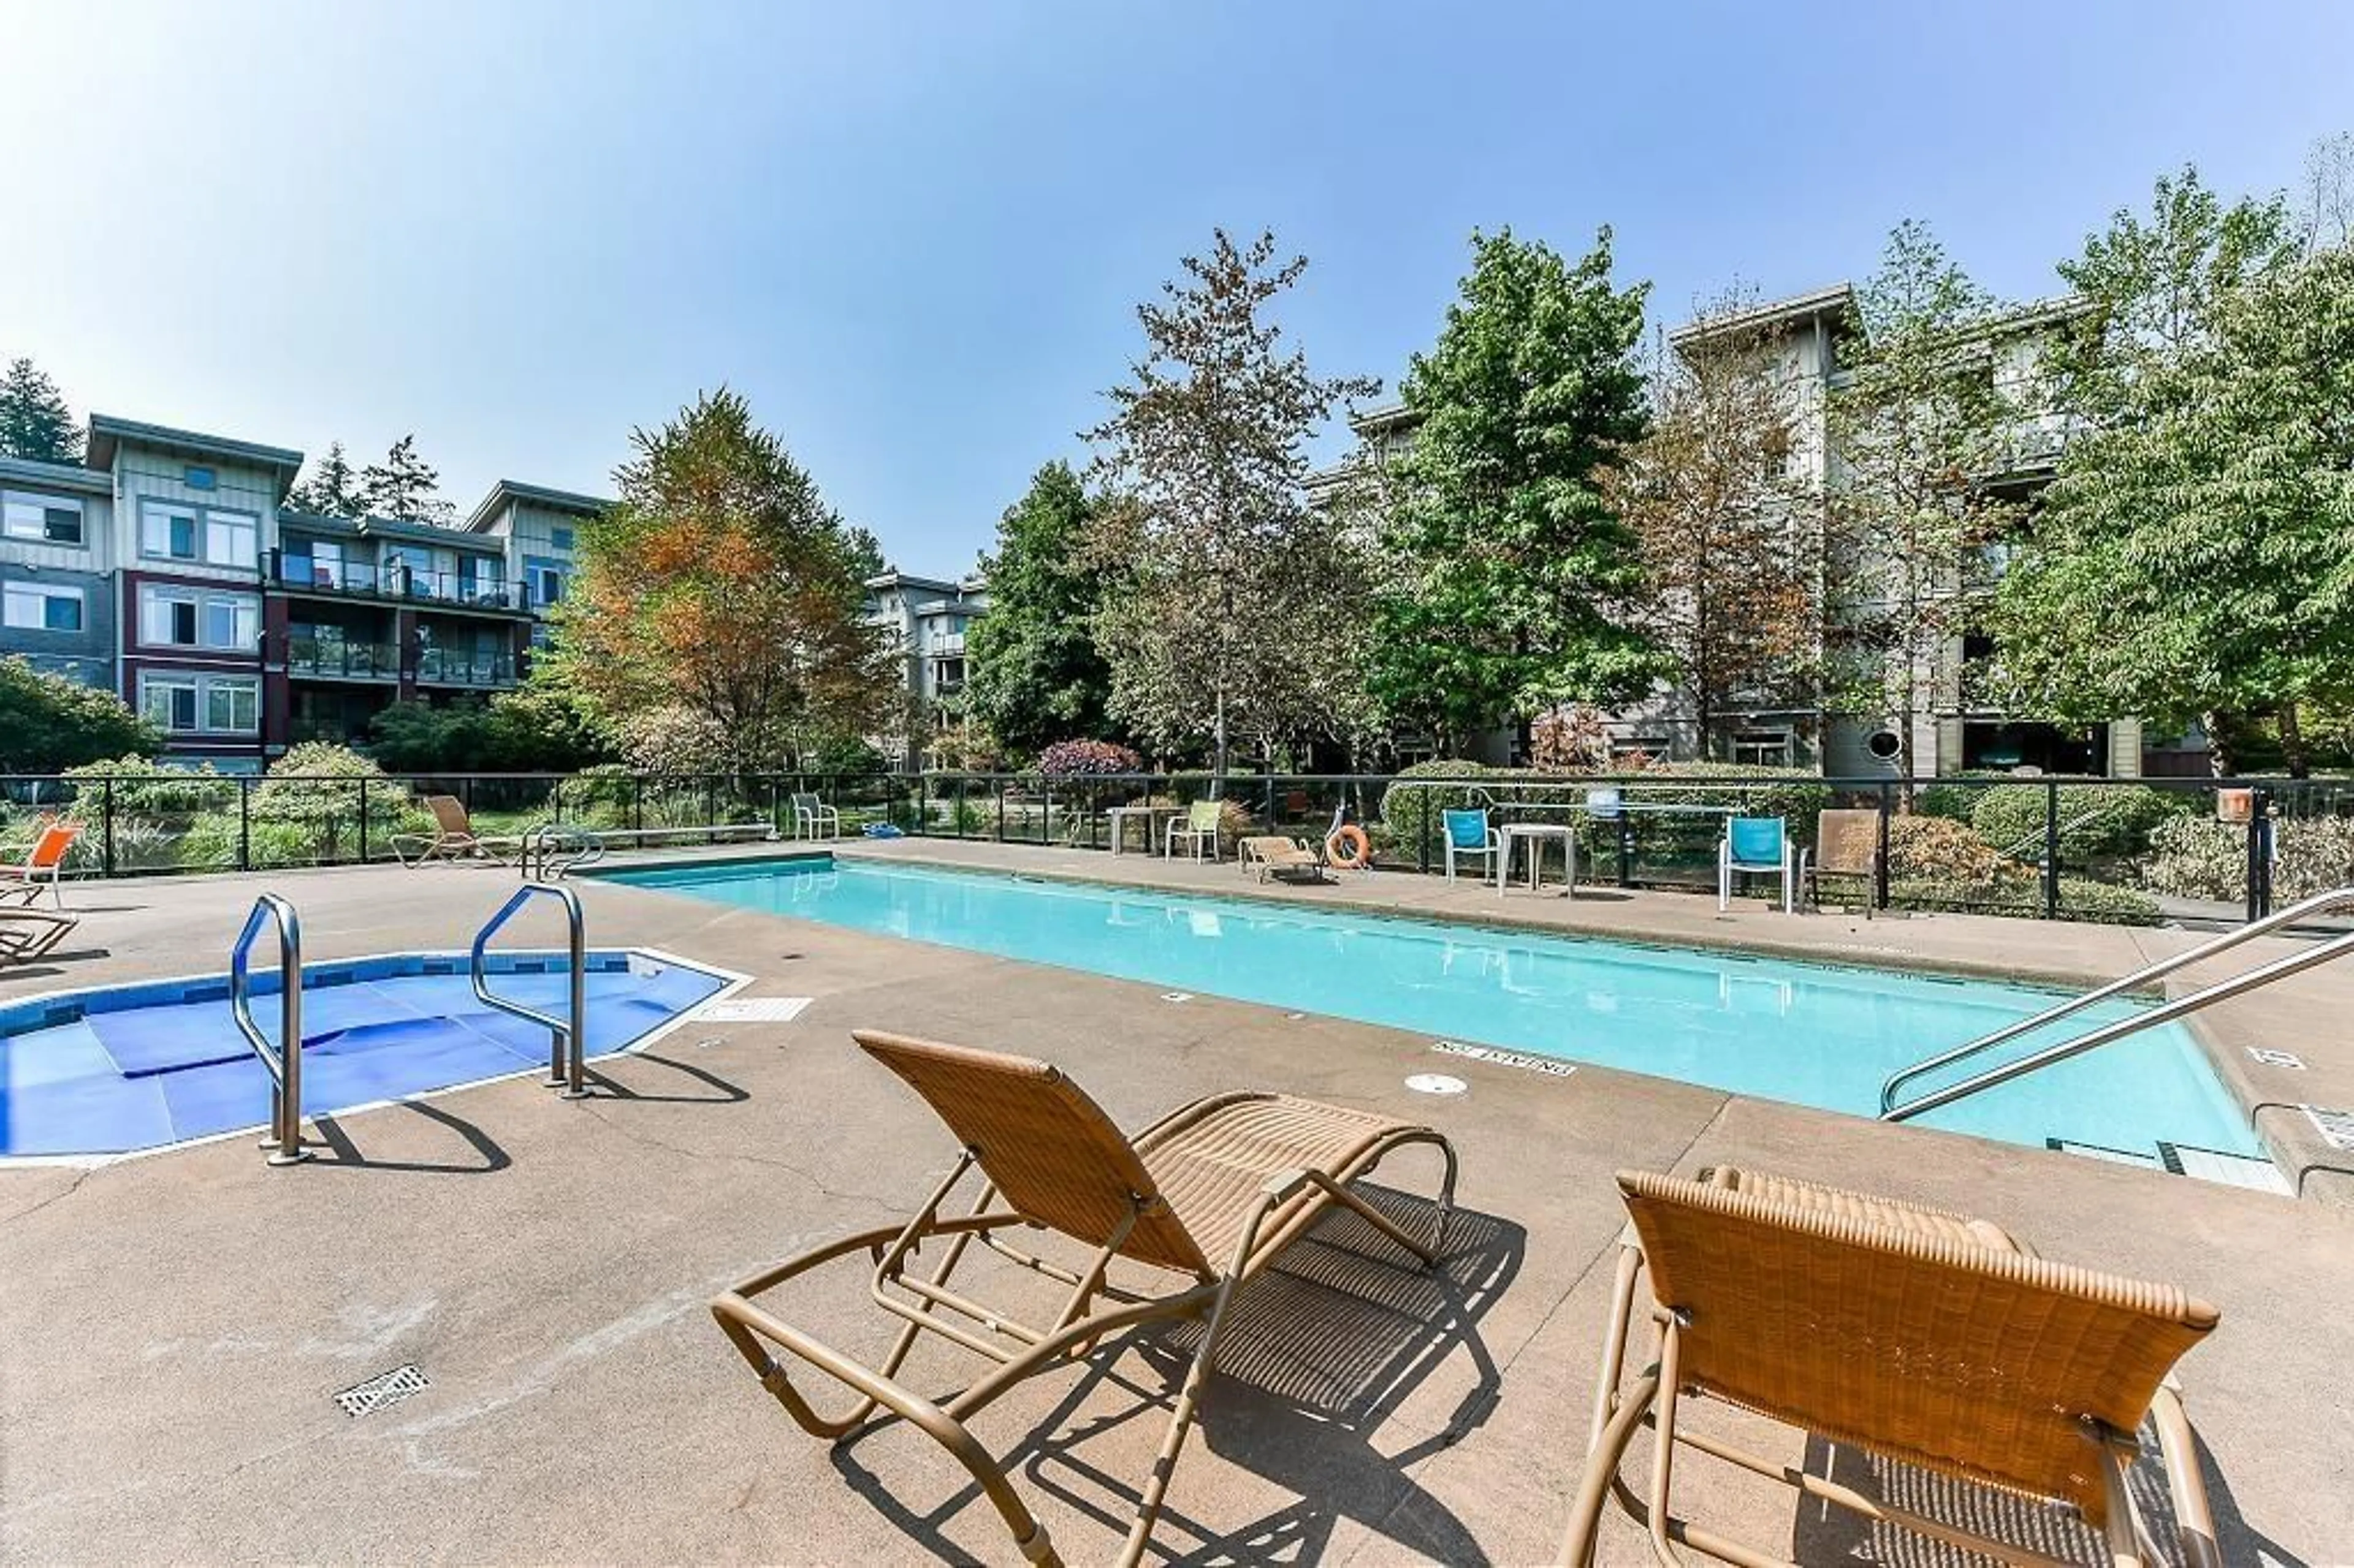 Indoor or outdoor pool for 221 15380 102A AVENUE, Surrey British Columbia V3R0B3